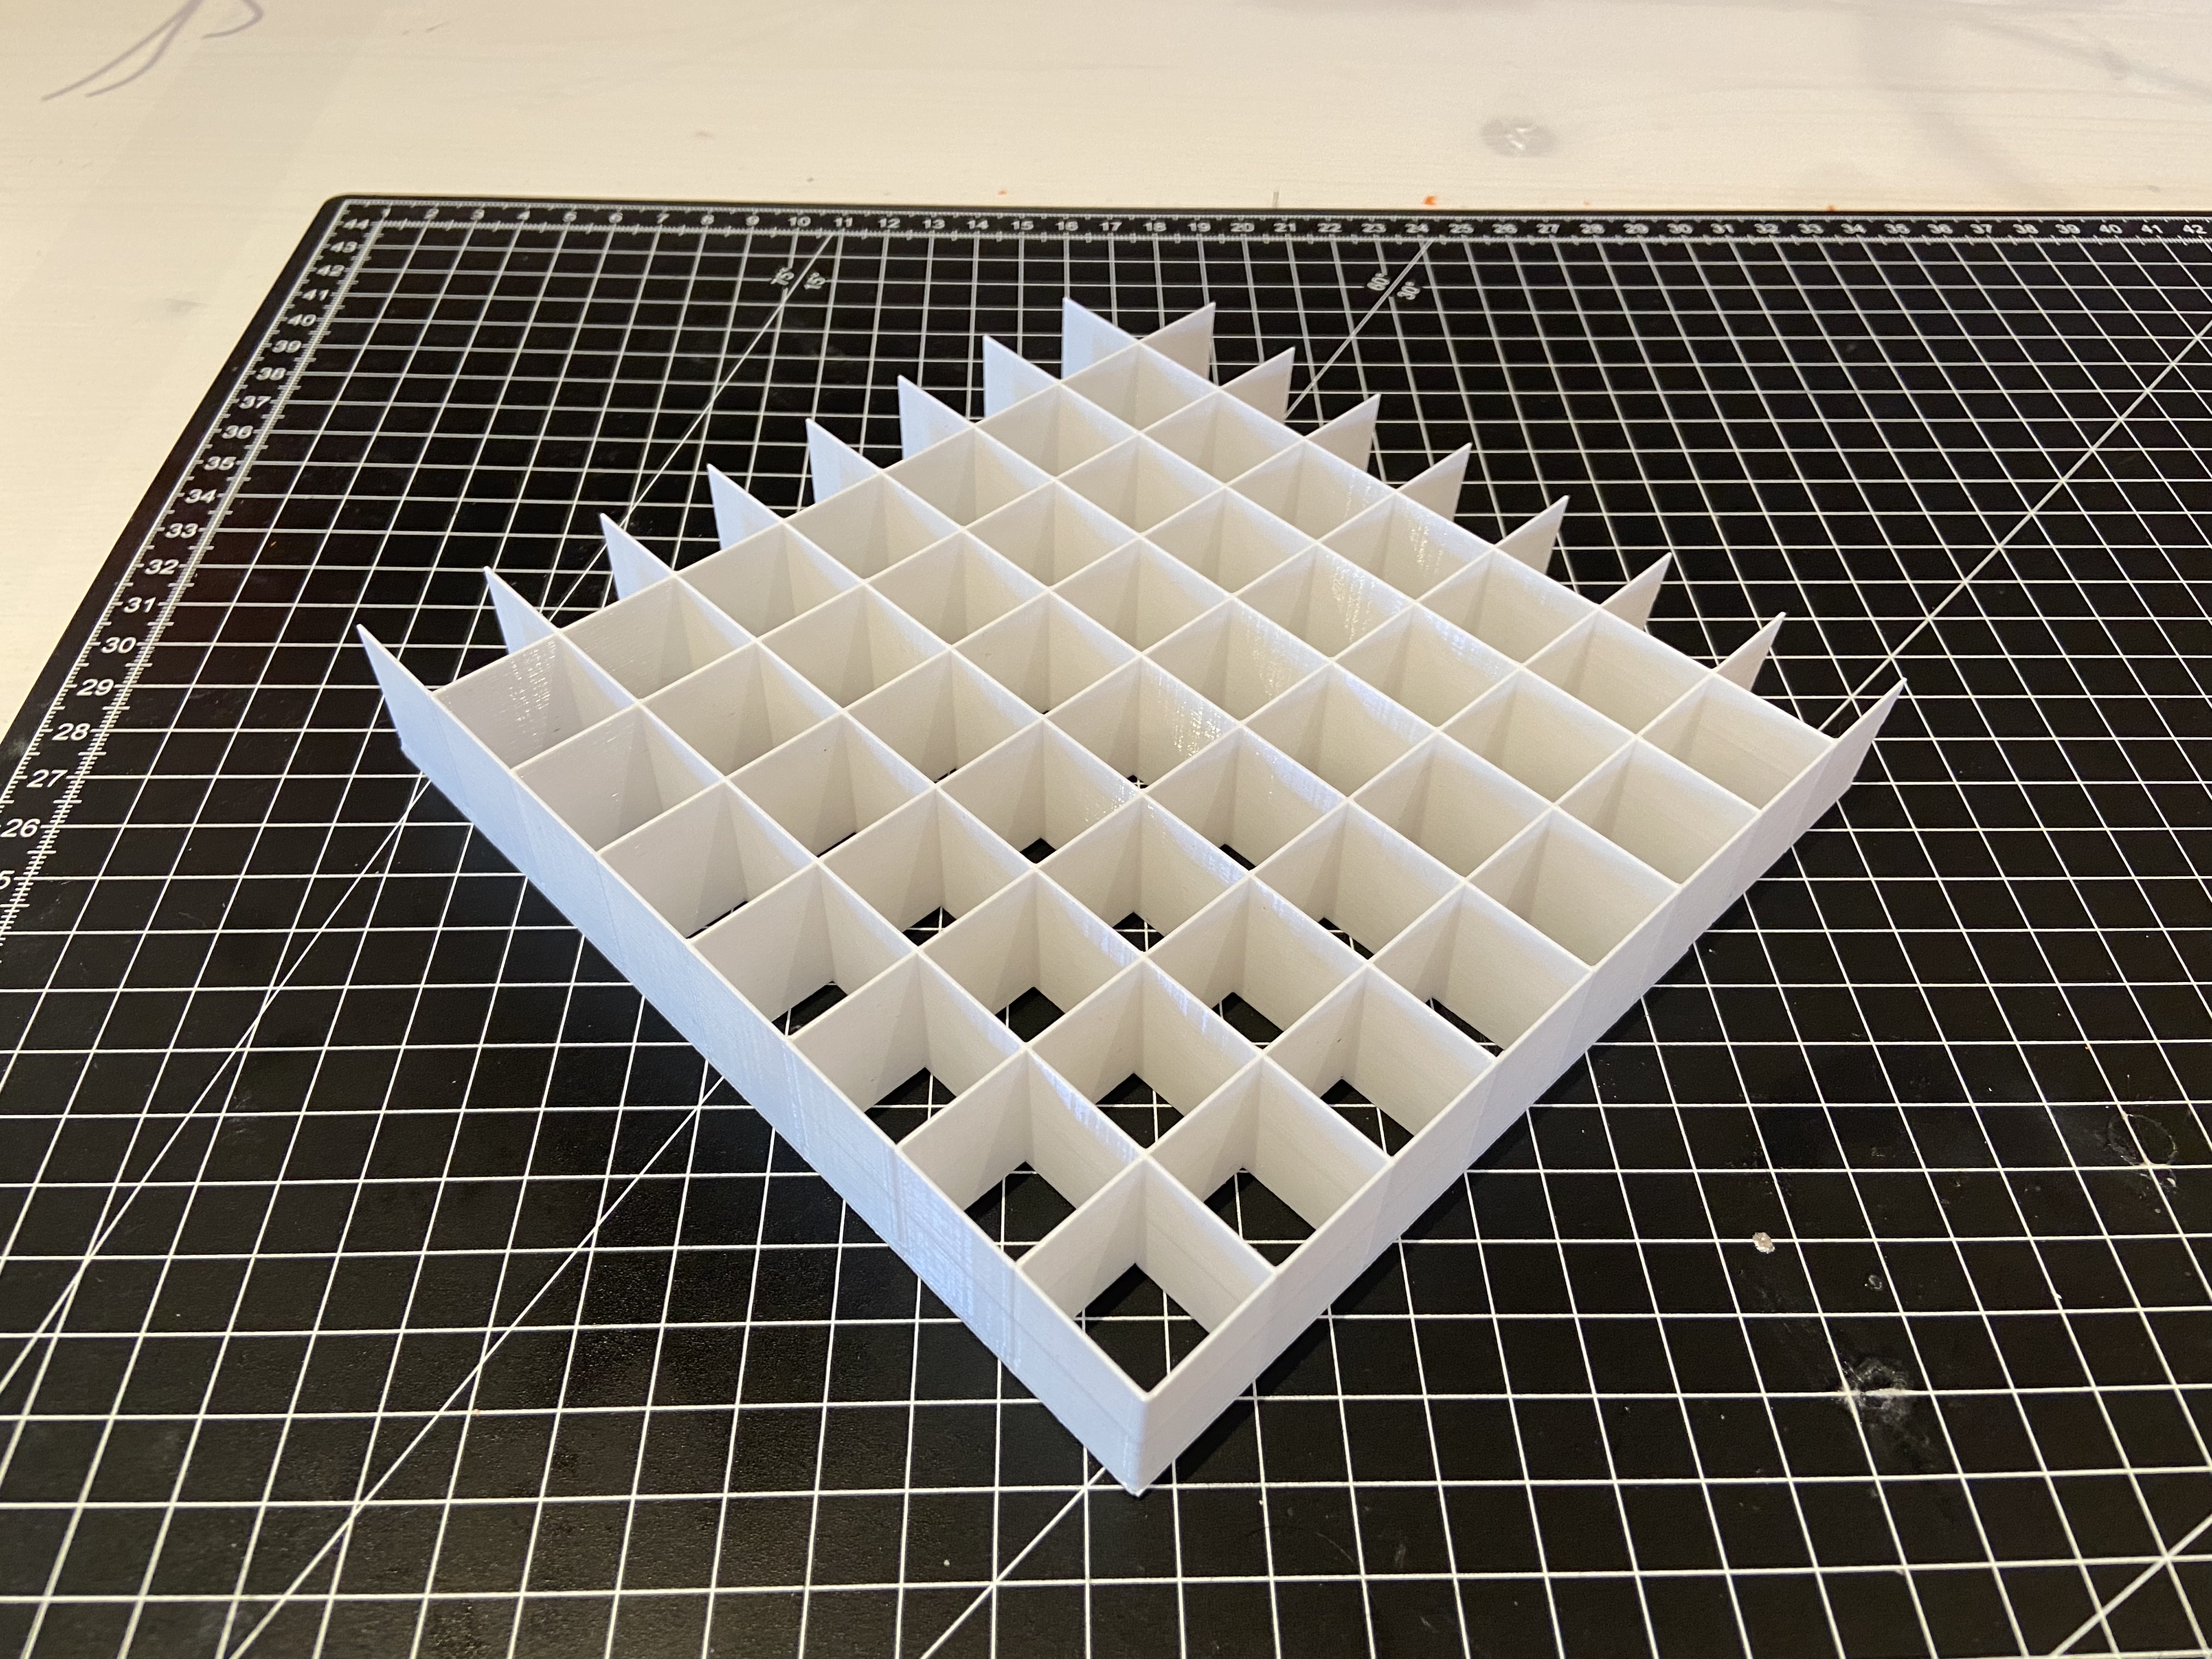 Grid Pattern for Laser Cutting